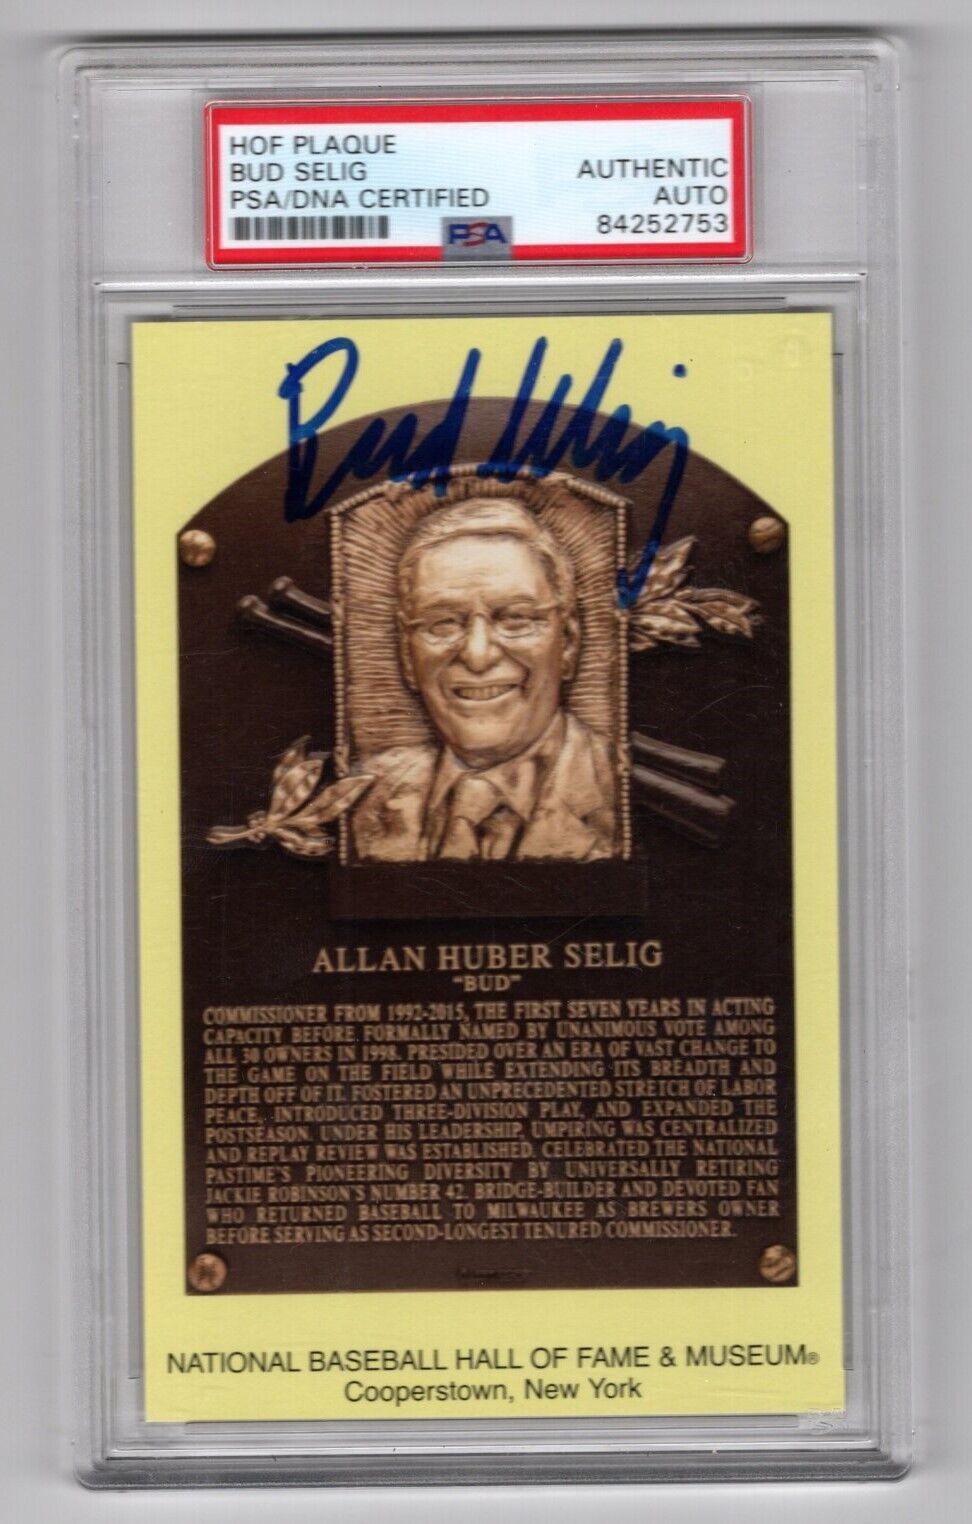 Bud Selig Auto Autograph Signed Hall Of Fame HOF Plaque Post Card PSA Authentic